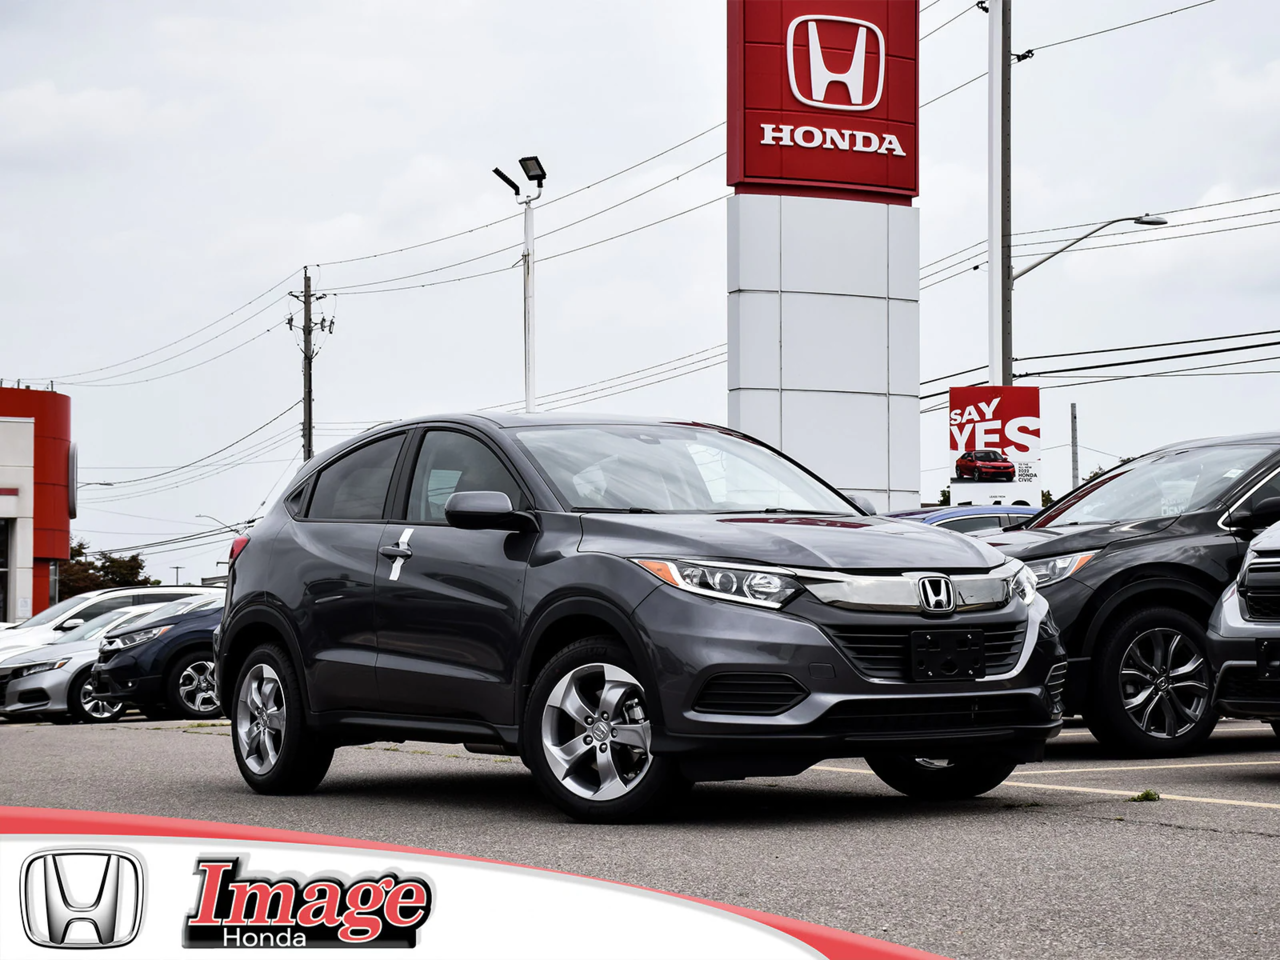 THE 2022 HONDA HR-V LX: VALUE WITHOUT COMPROMISE